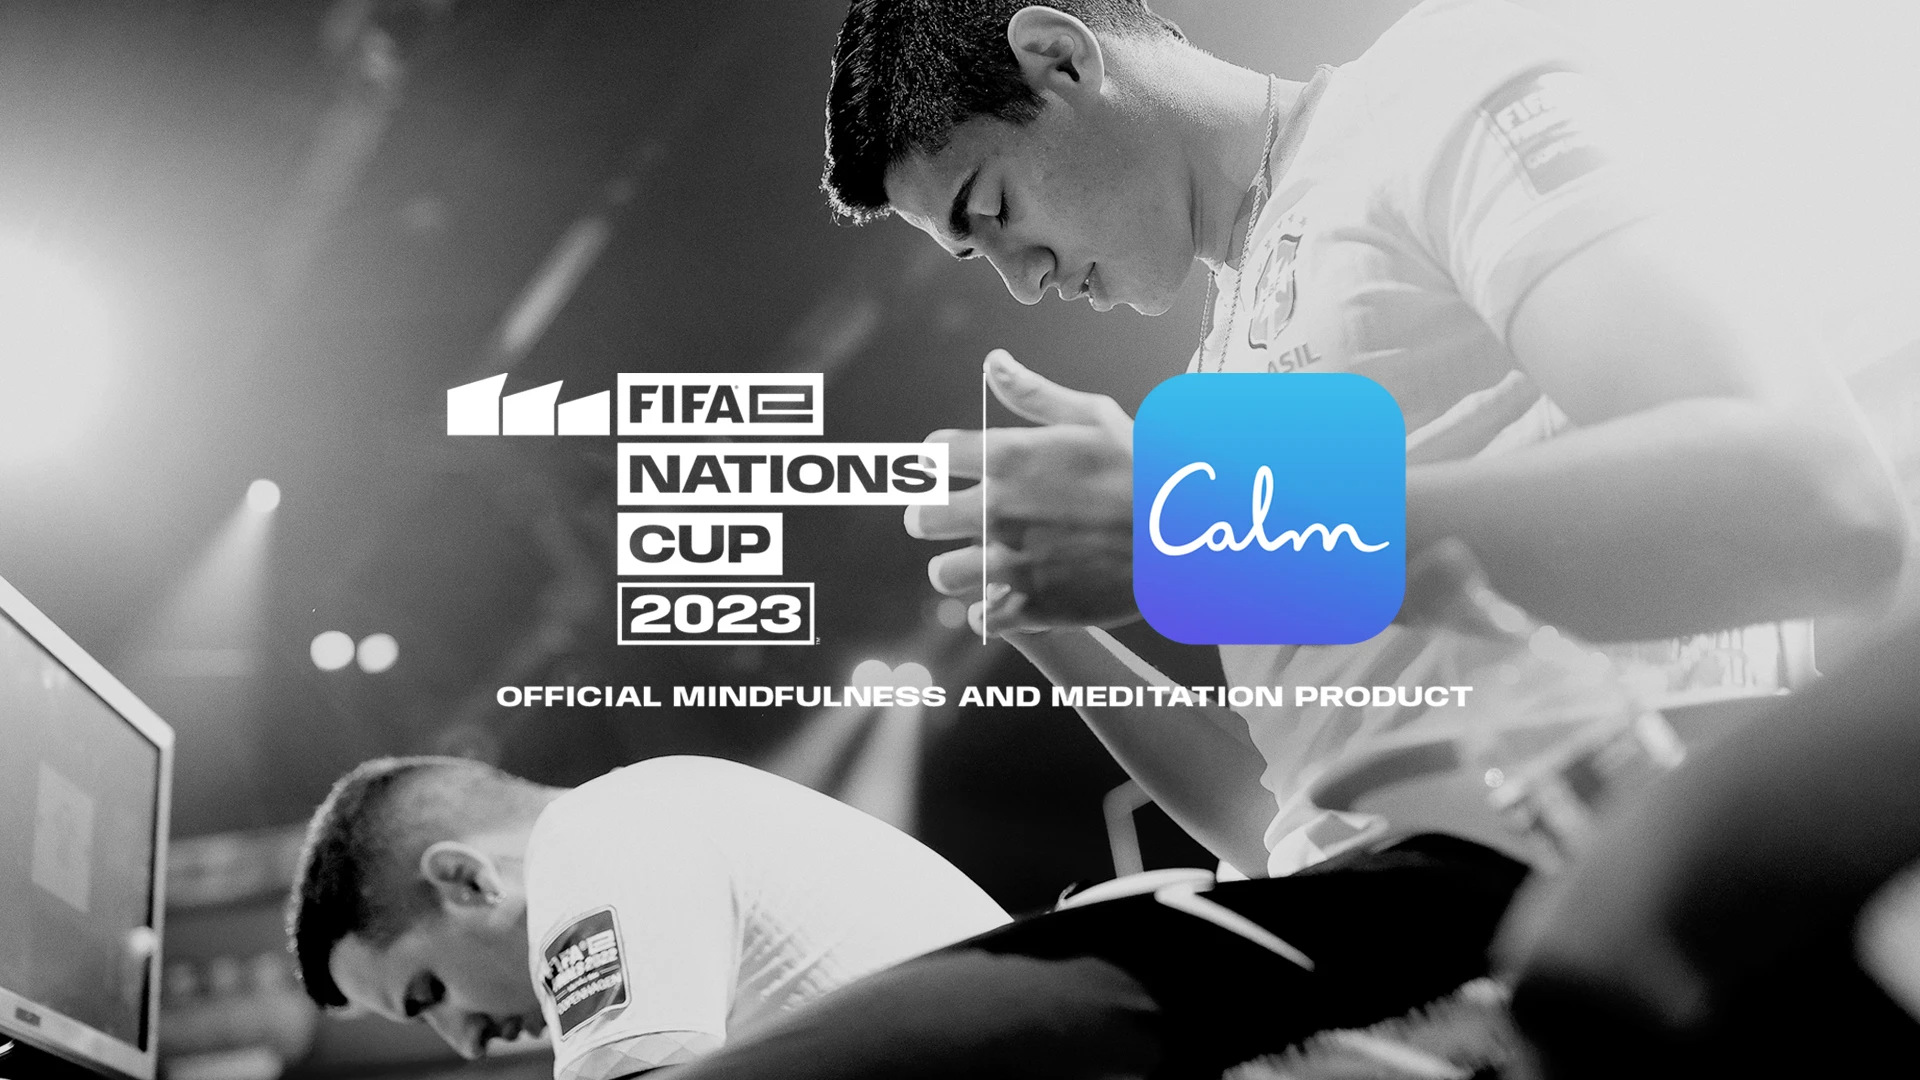 FIFA continues its partnership with Calm